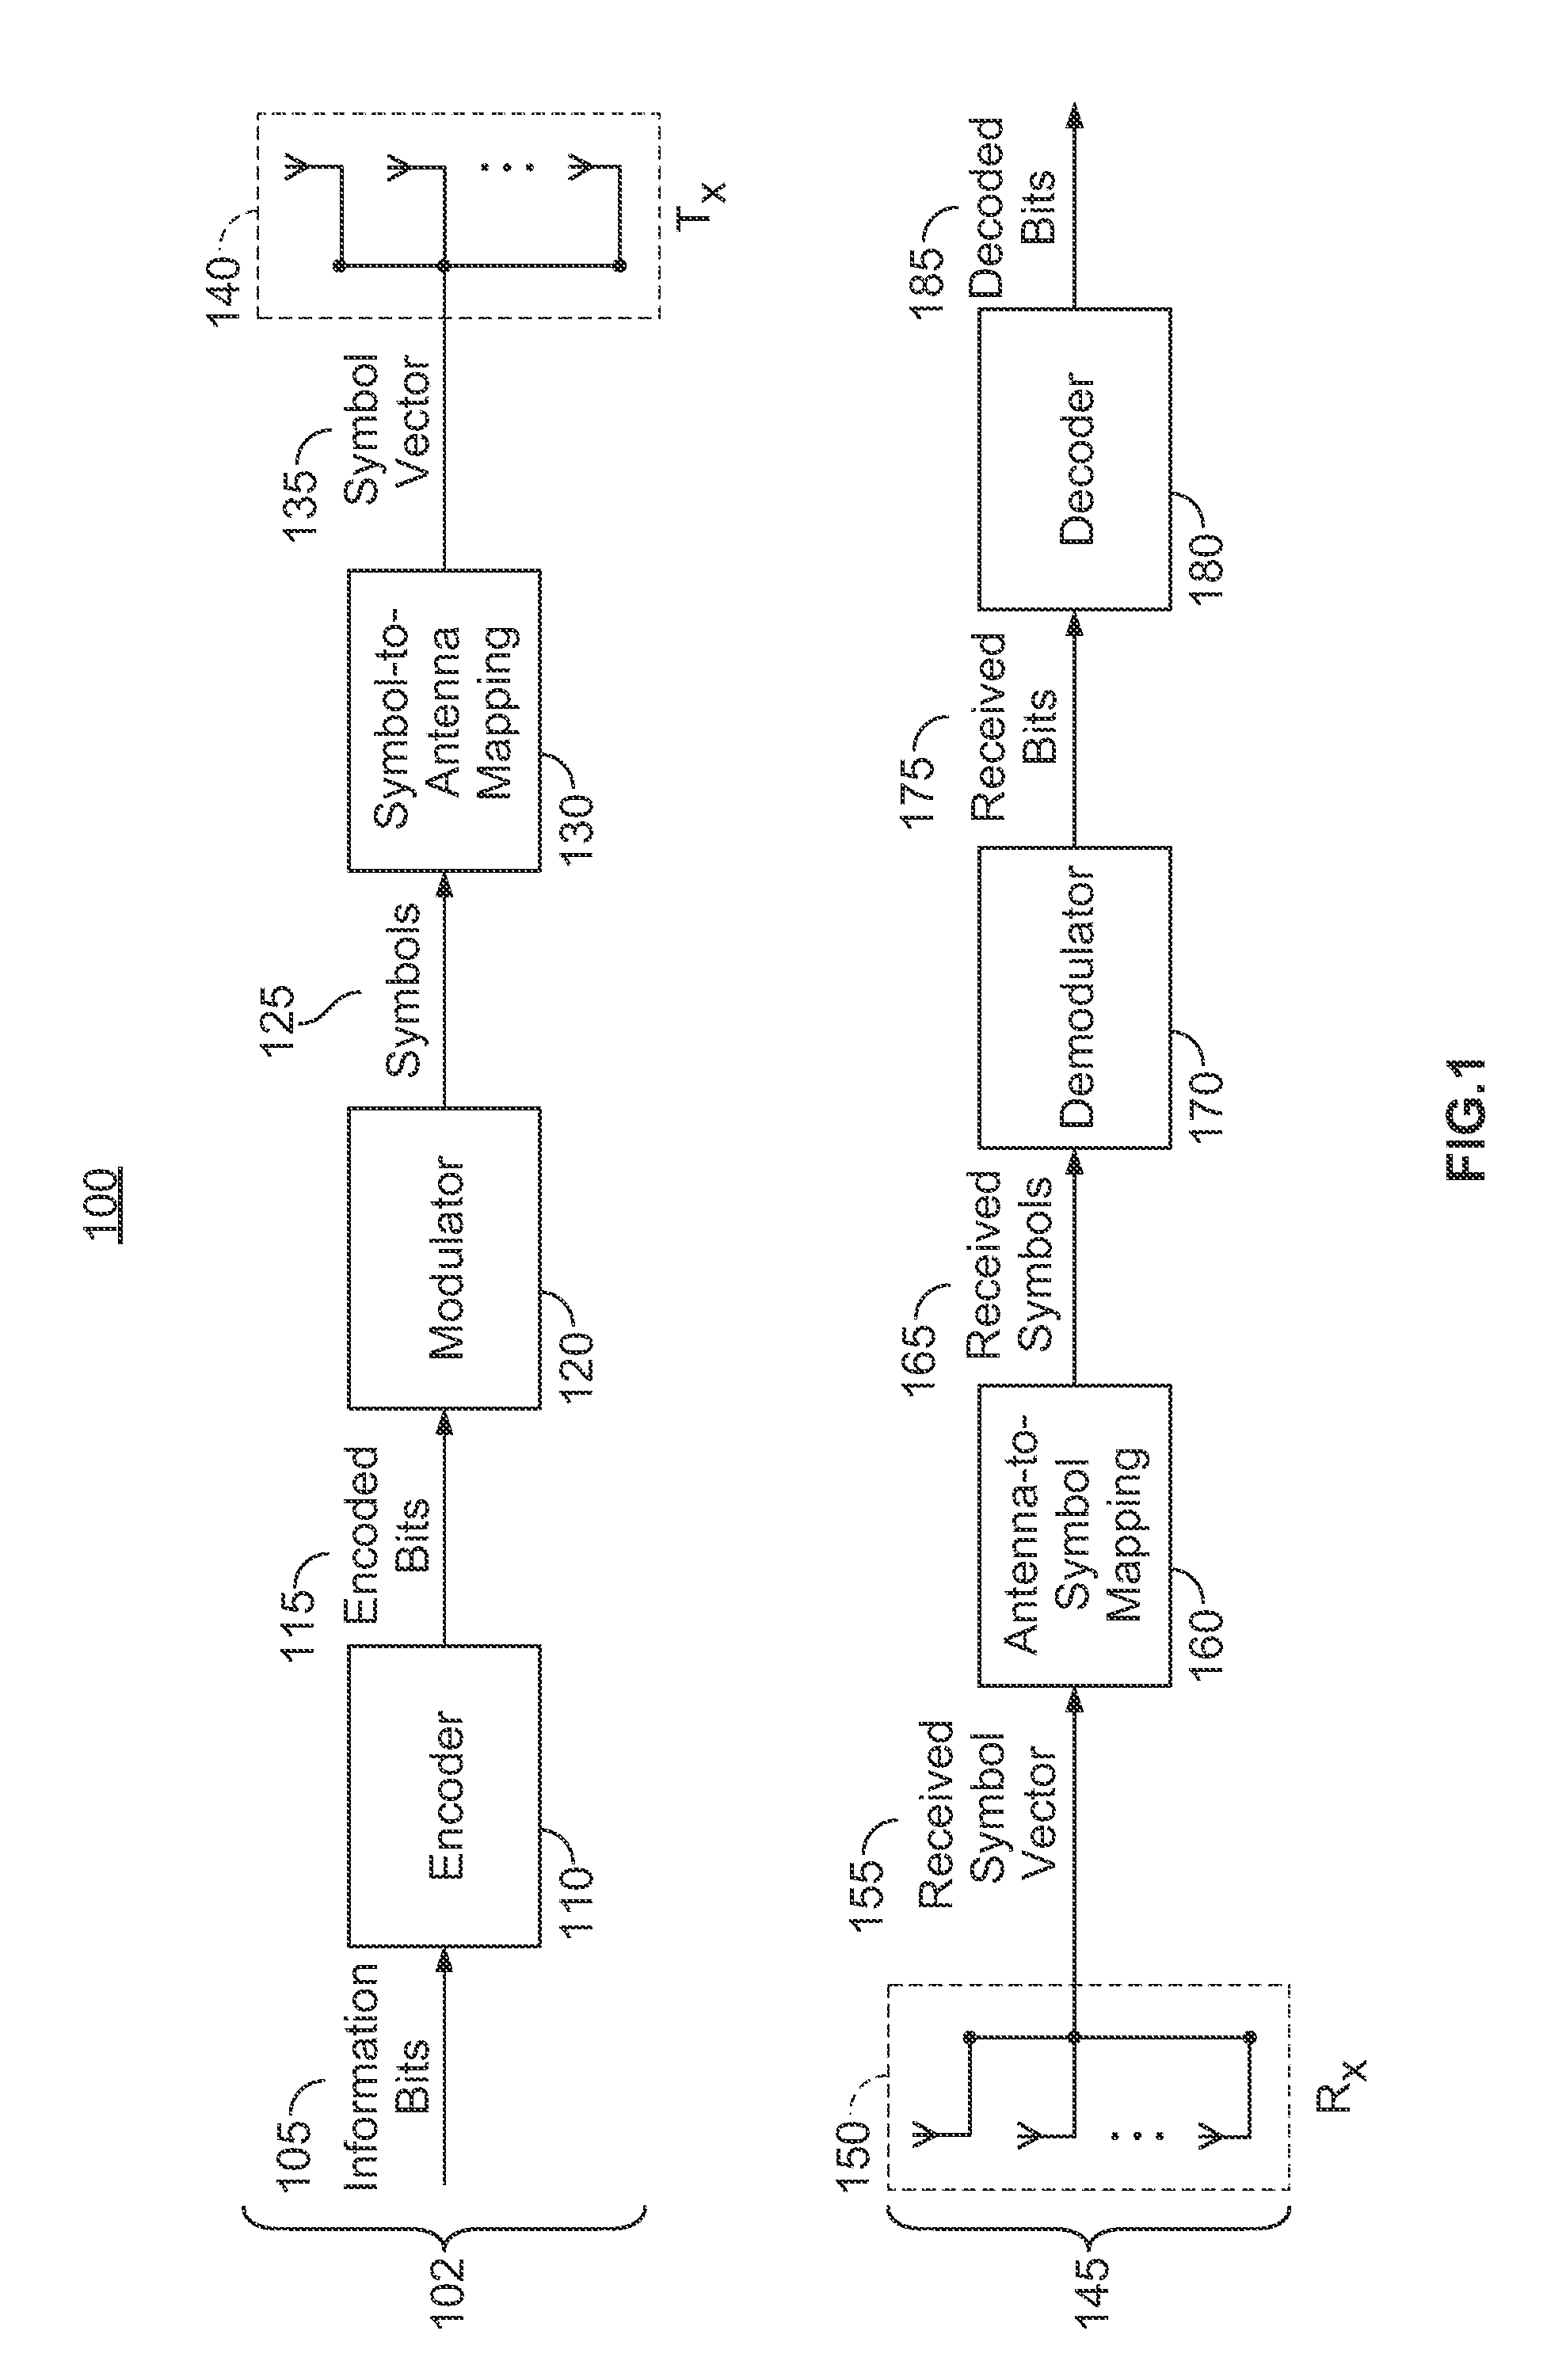 Symbol vector-level combining receiver for incremental redundancy HARQ with MIMO